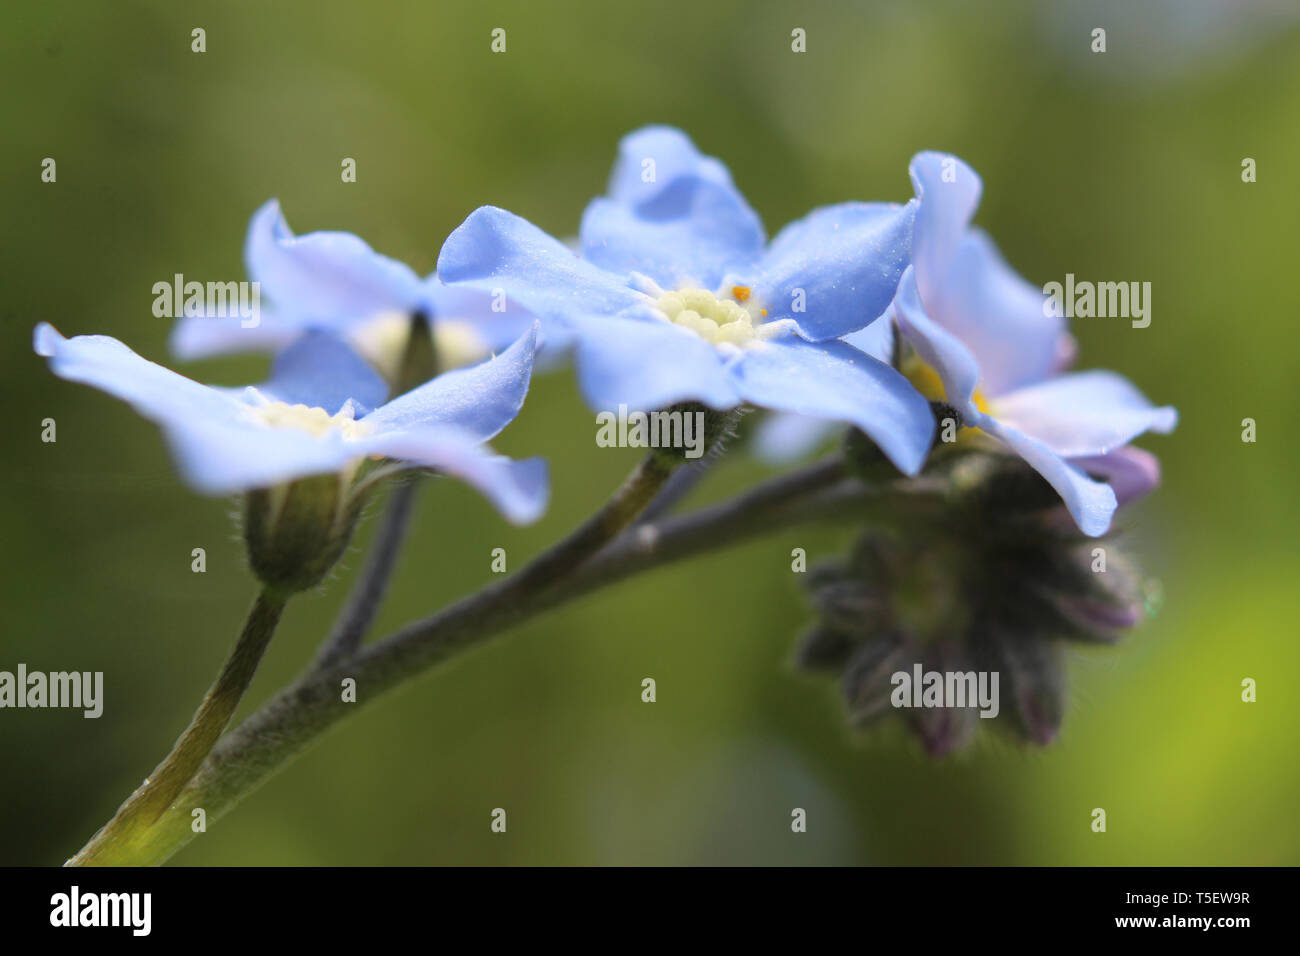 Extreme close up of beautiful Mysotis (Forget me not) flowers in a natural outdoor setting in the spring. Selective focus. Stock Photo